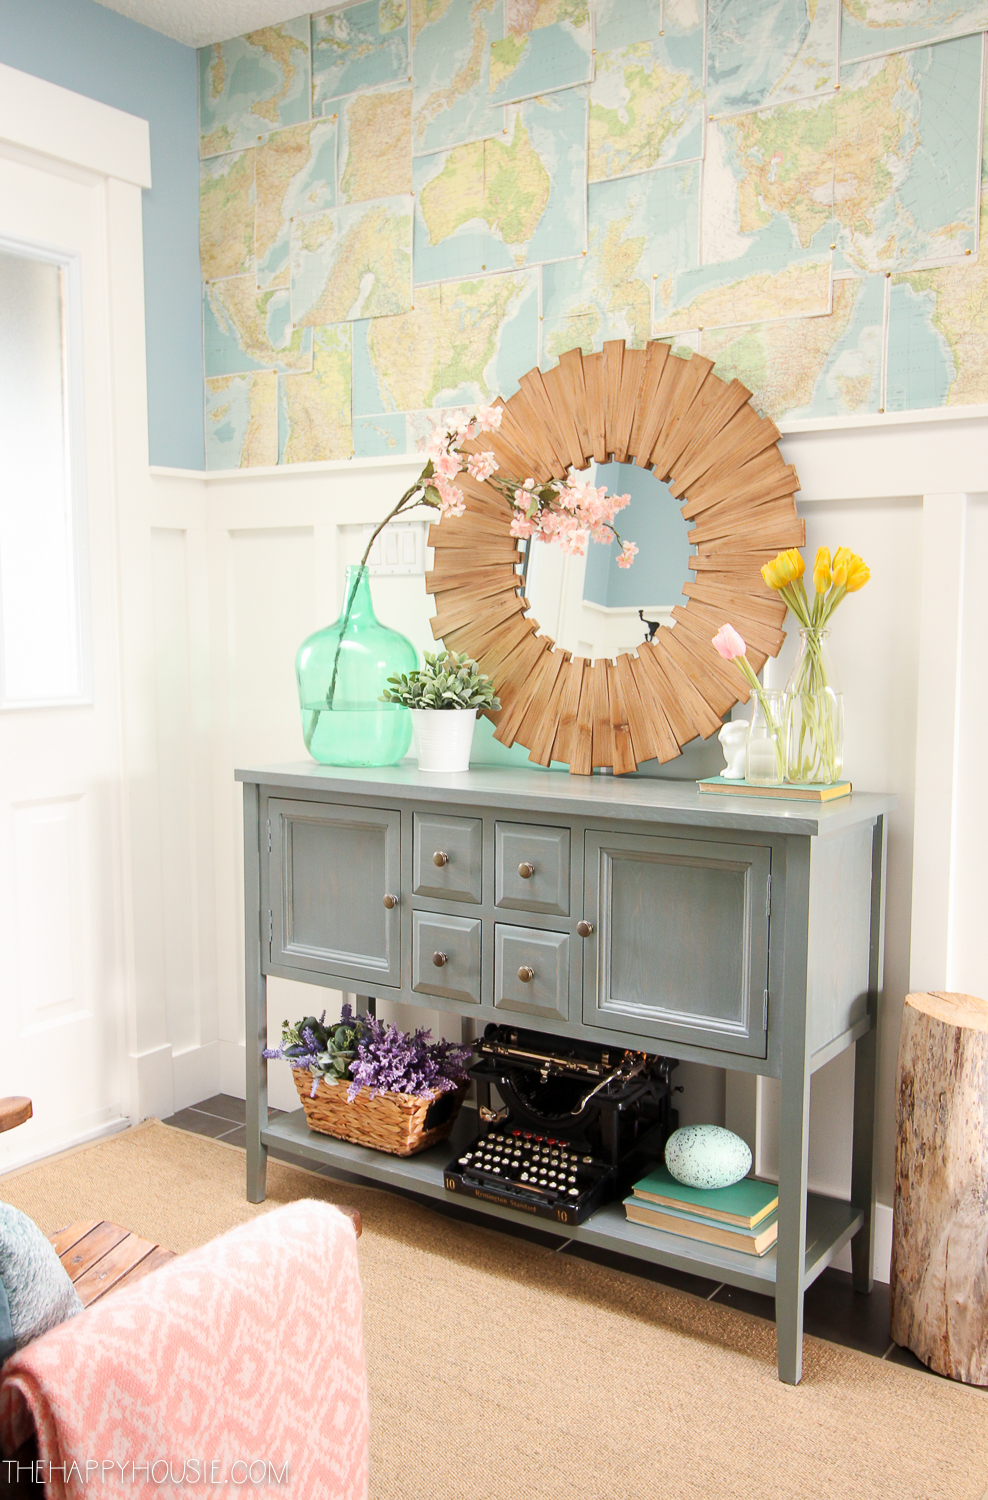 A wooden sunburst mirror with a map above it in the entryway.